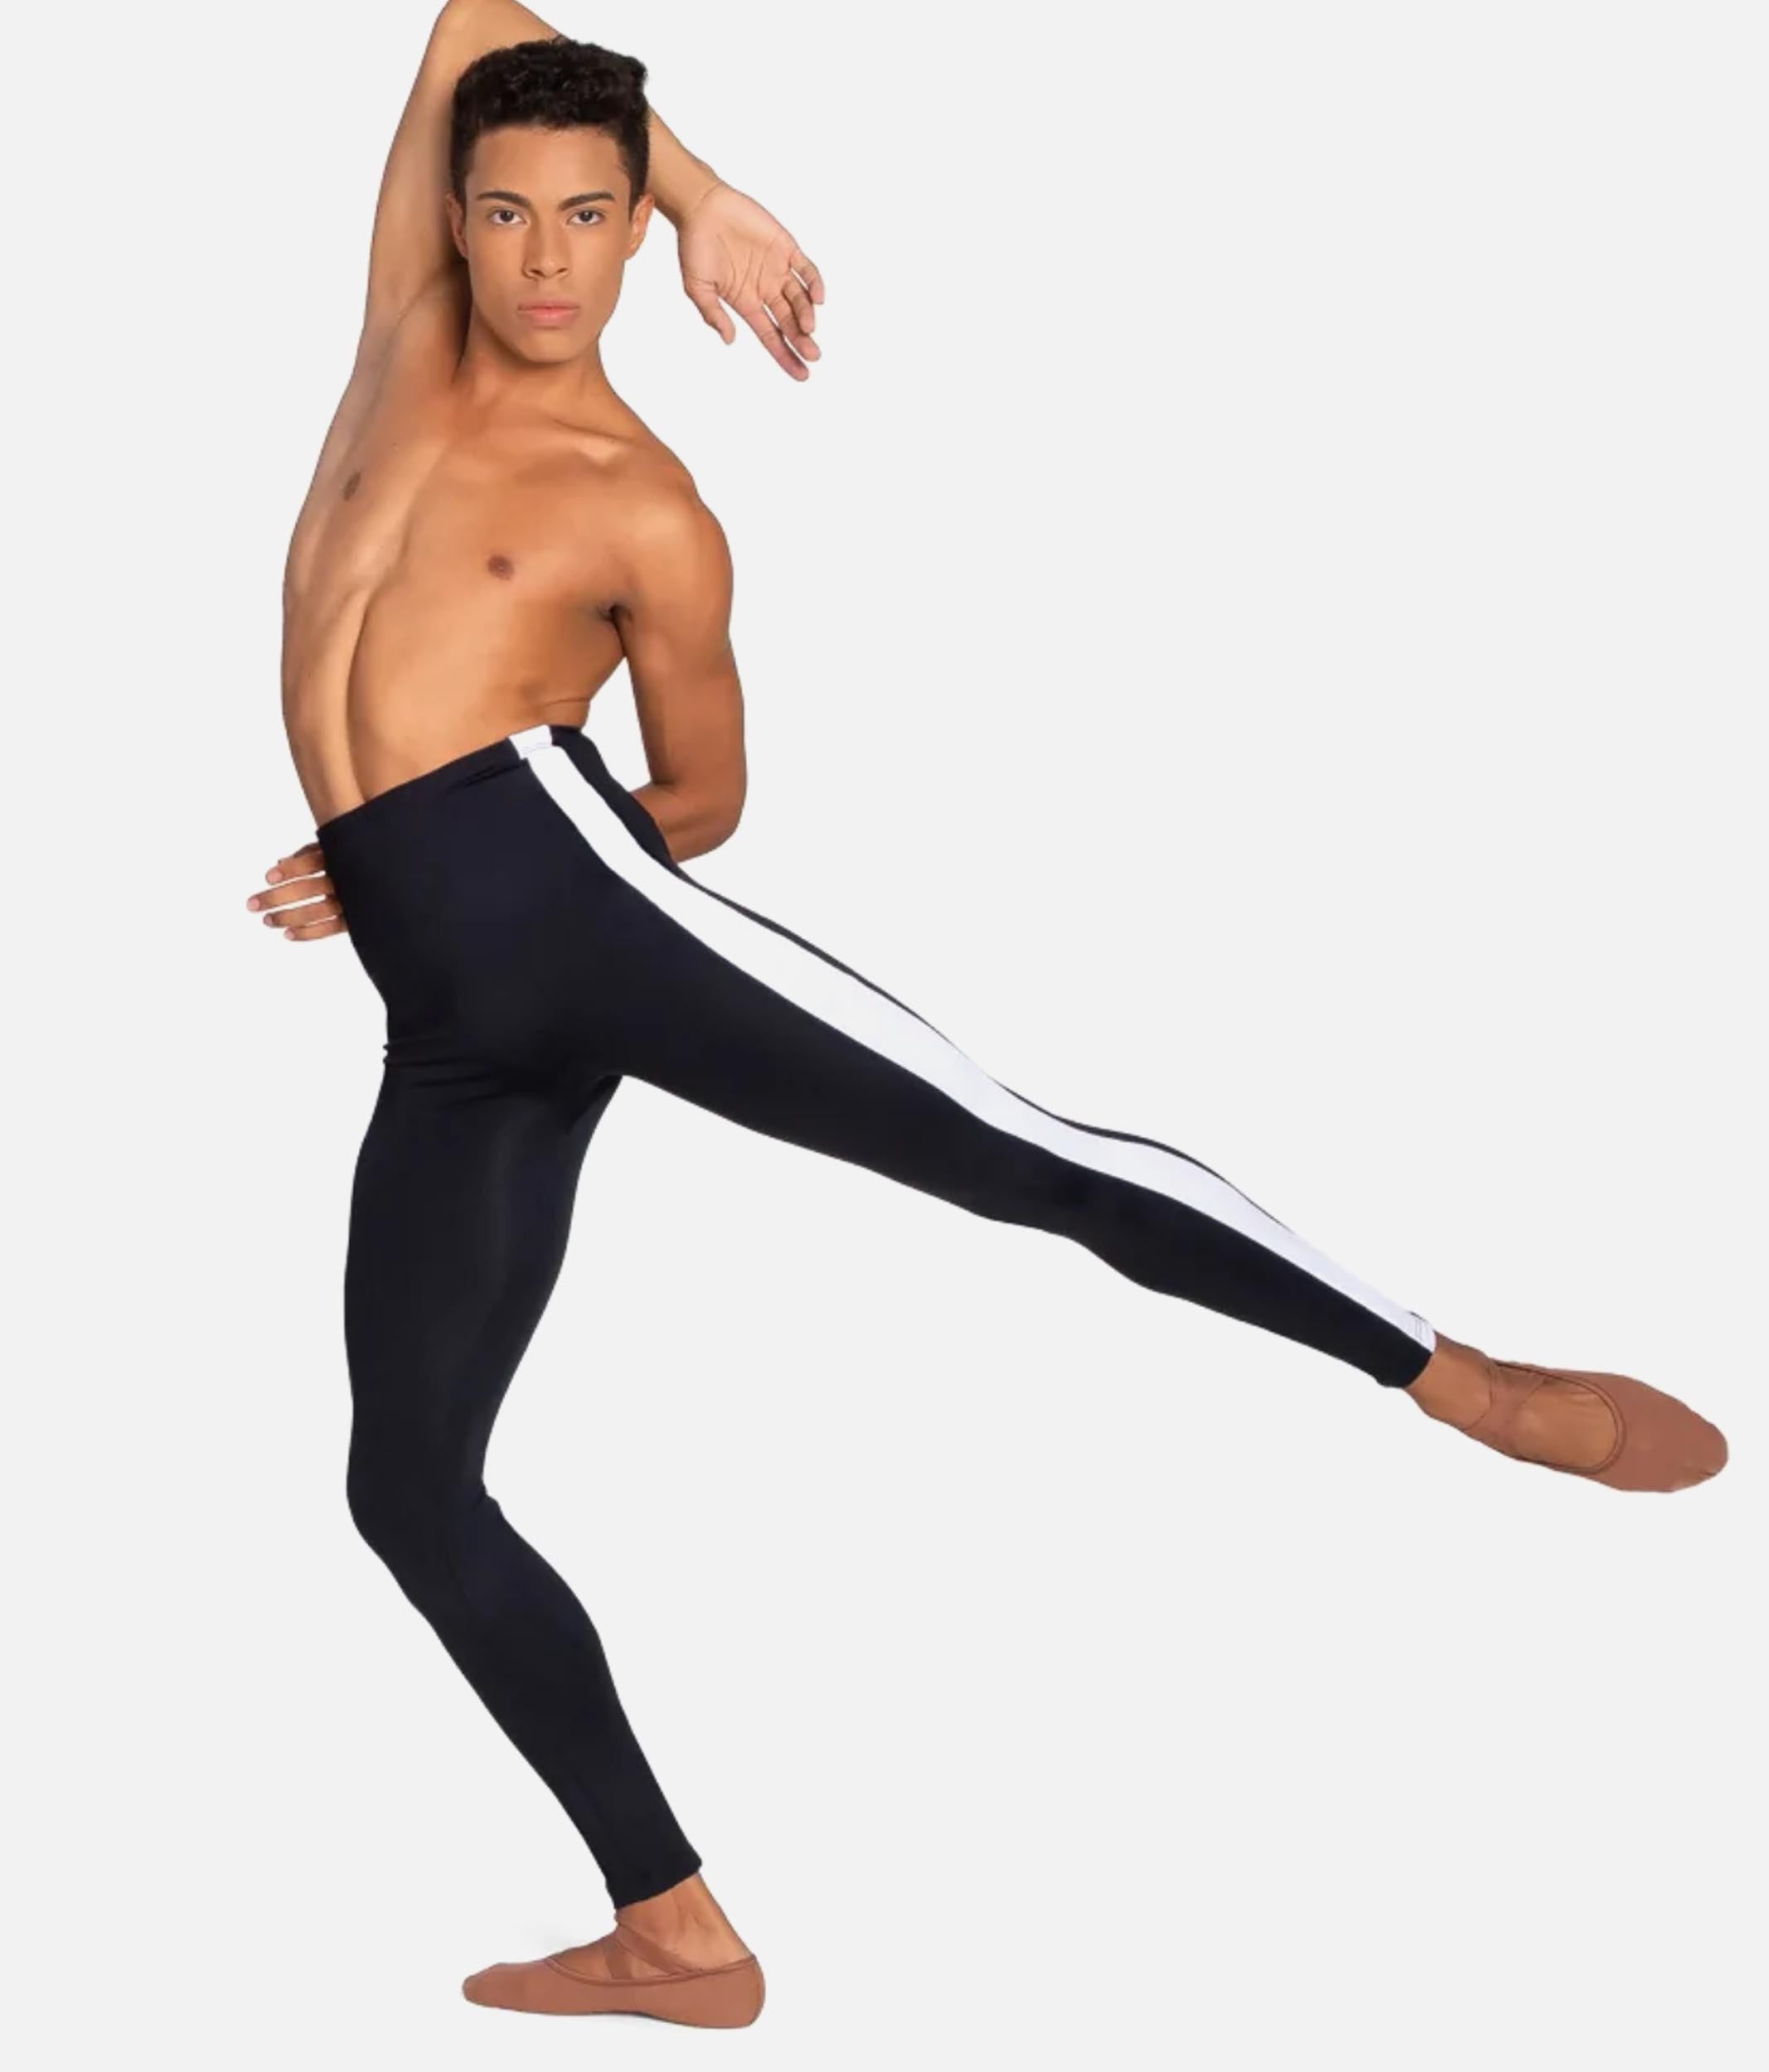 NEW! So Danca Women's Footless Dance Tights - Style TS-74 - You Go